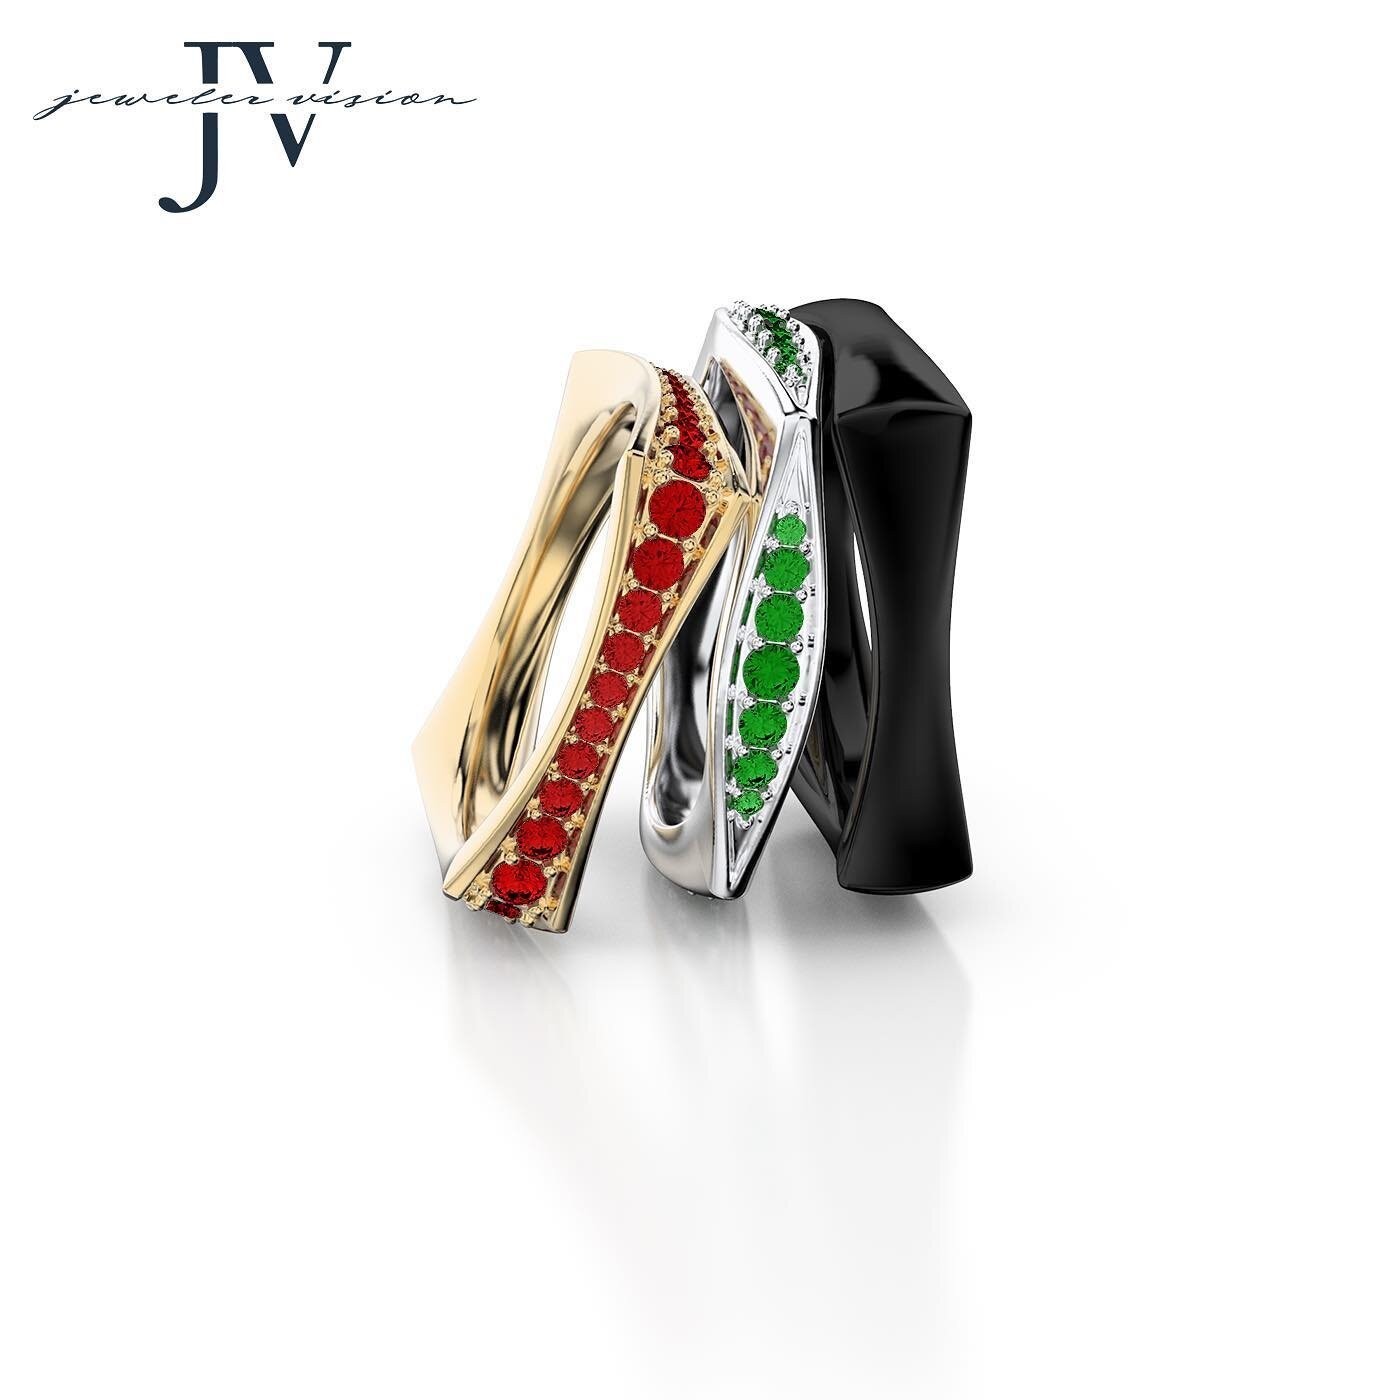 Get the finest jewelry from the best jewelry stores in Montreal